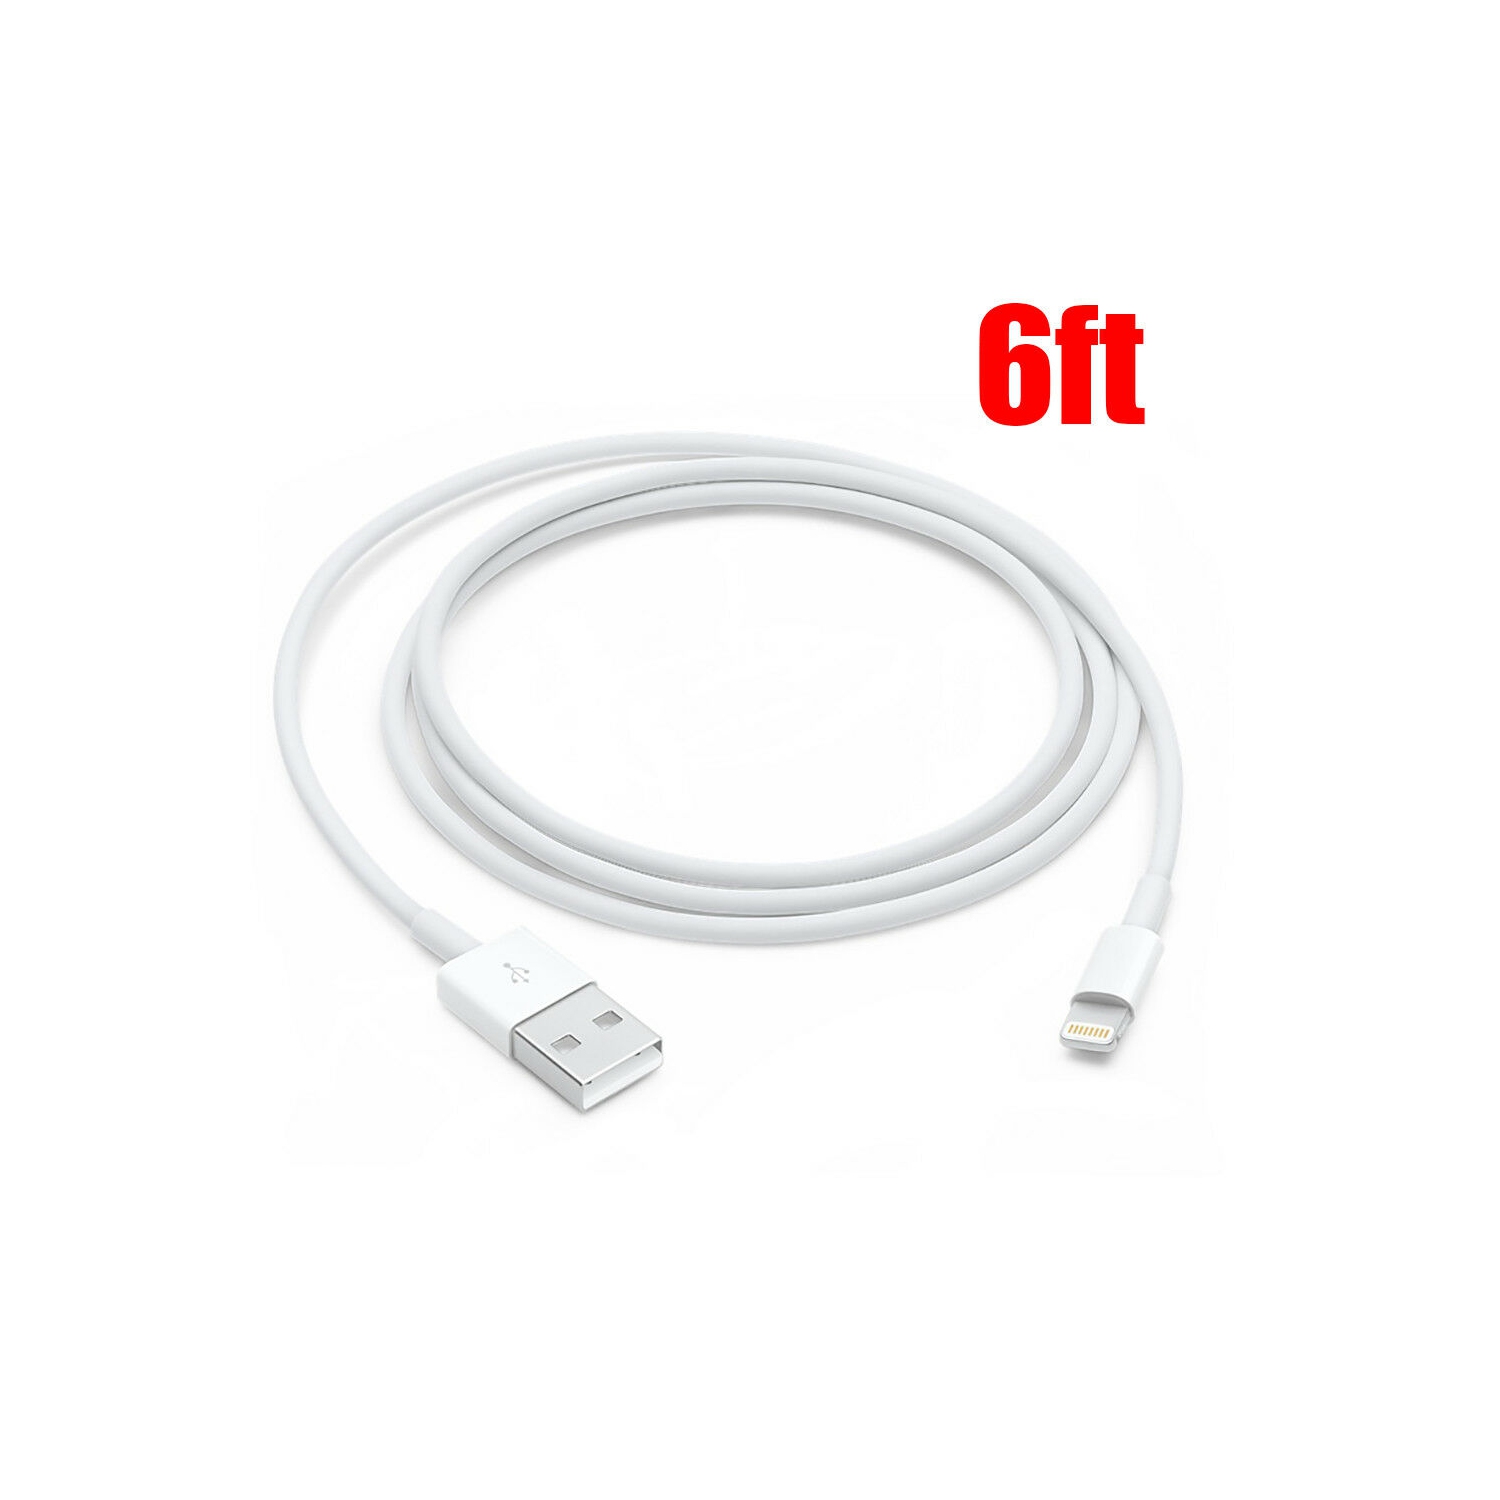 (6.6Ft / 2m) iPhone iPad Charging Cable Charger Cord Lightning to USB Cable COMPATIBLE for iPod iPad iPhone Pro Max